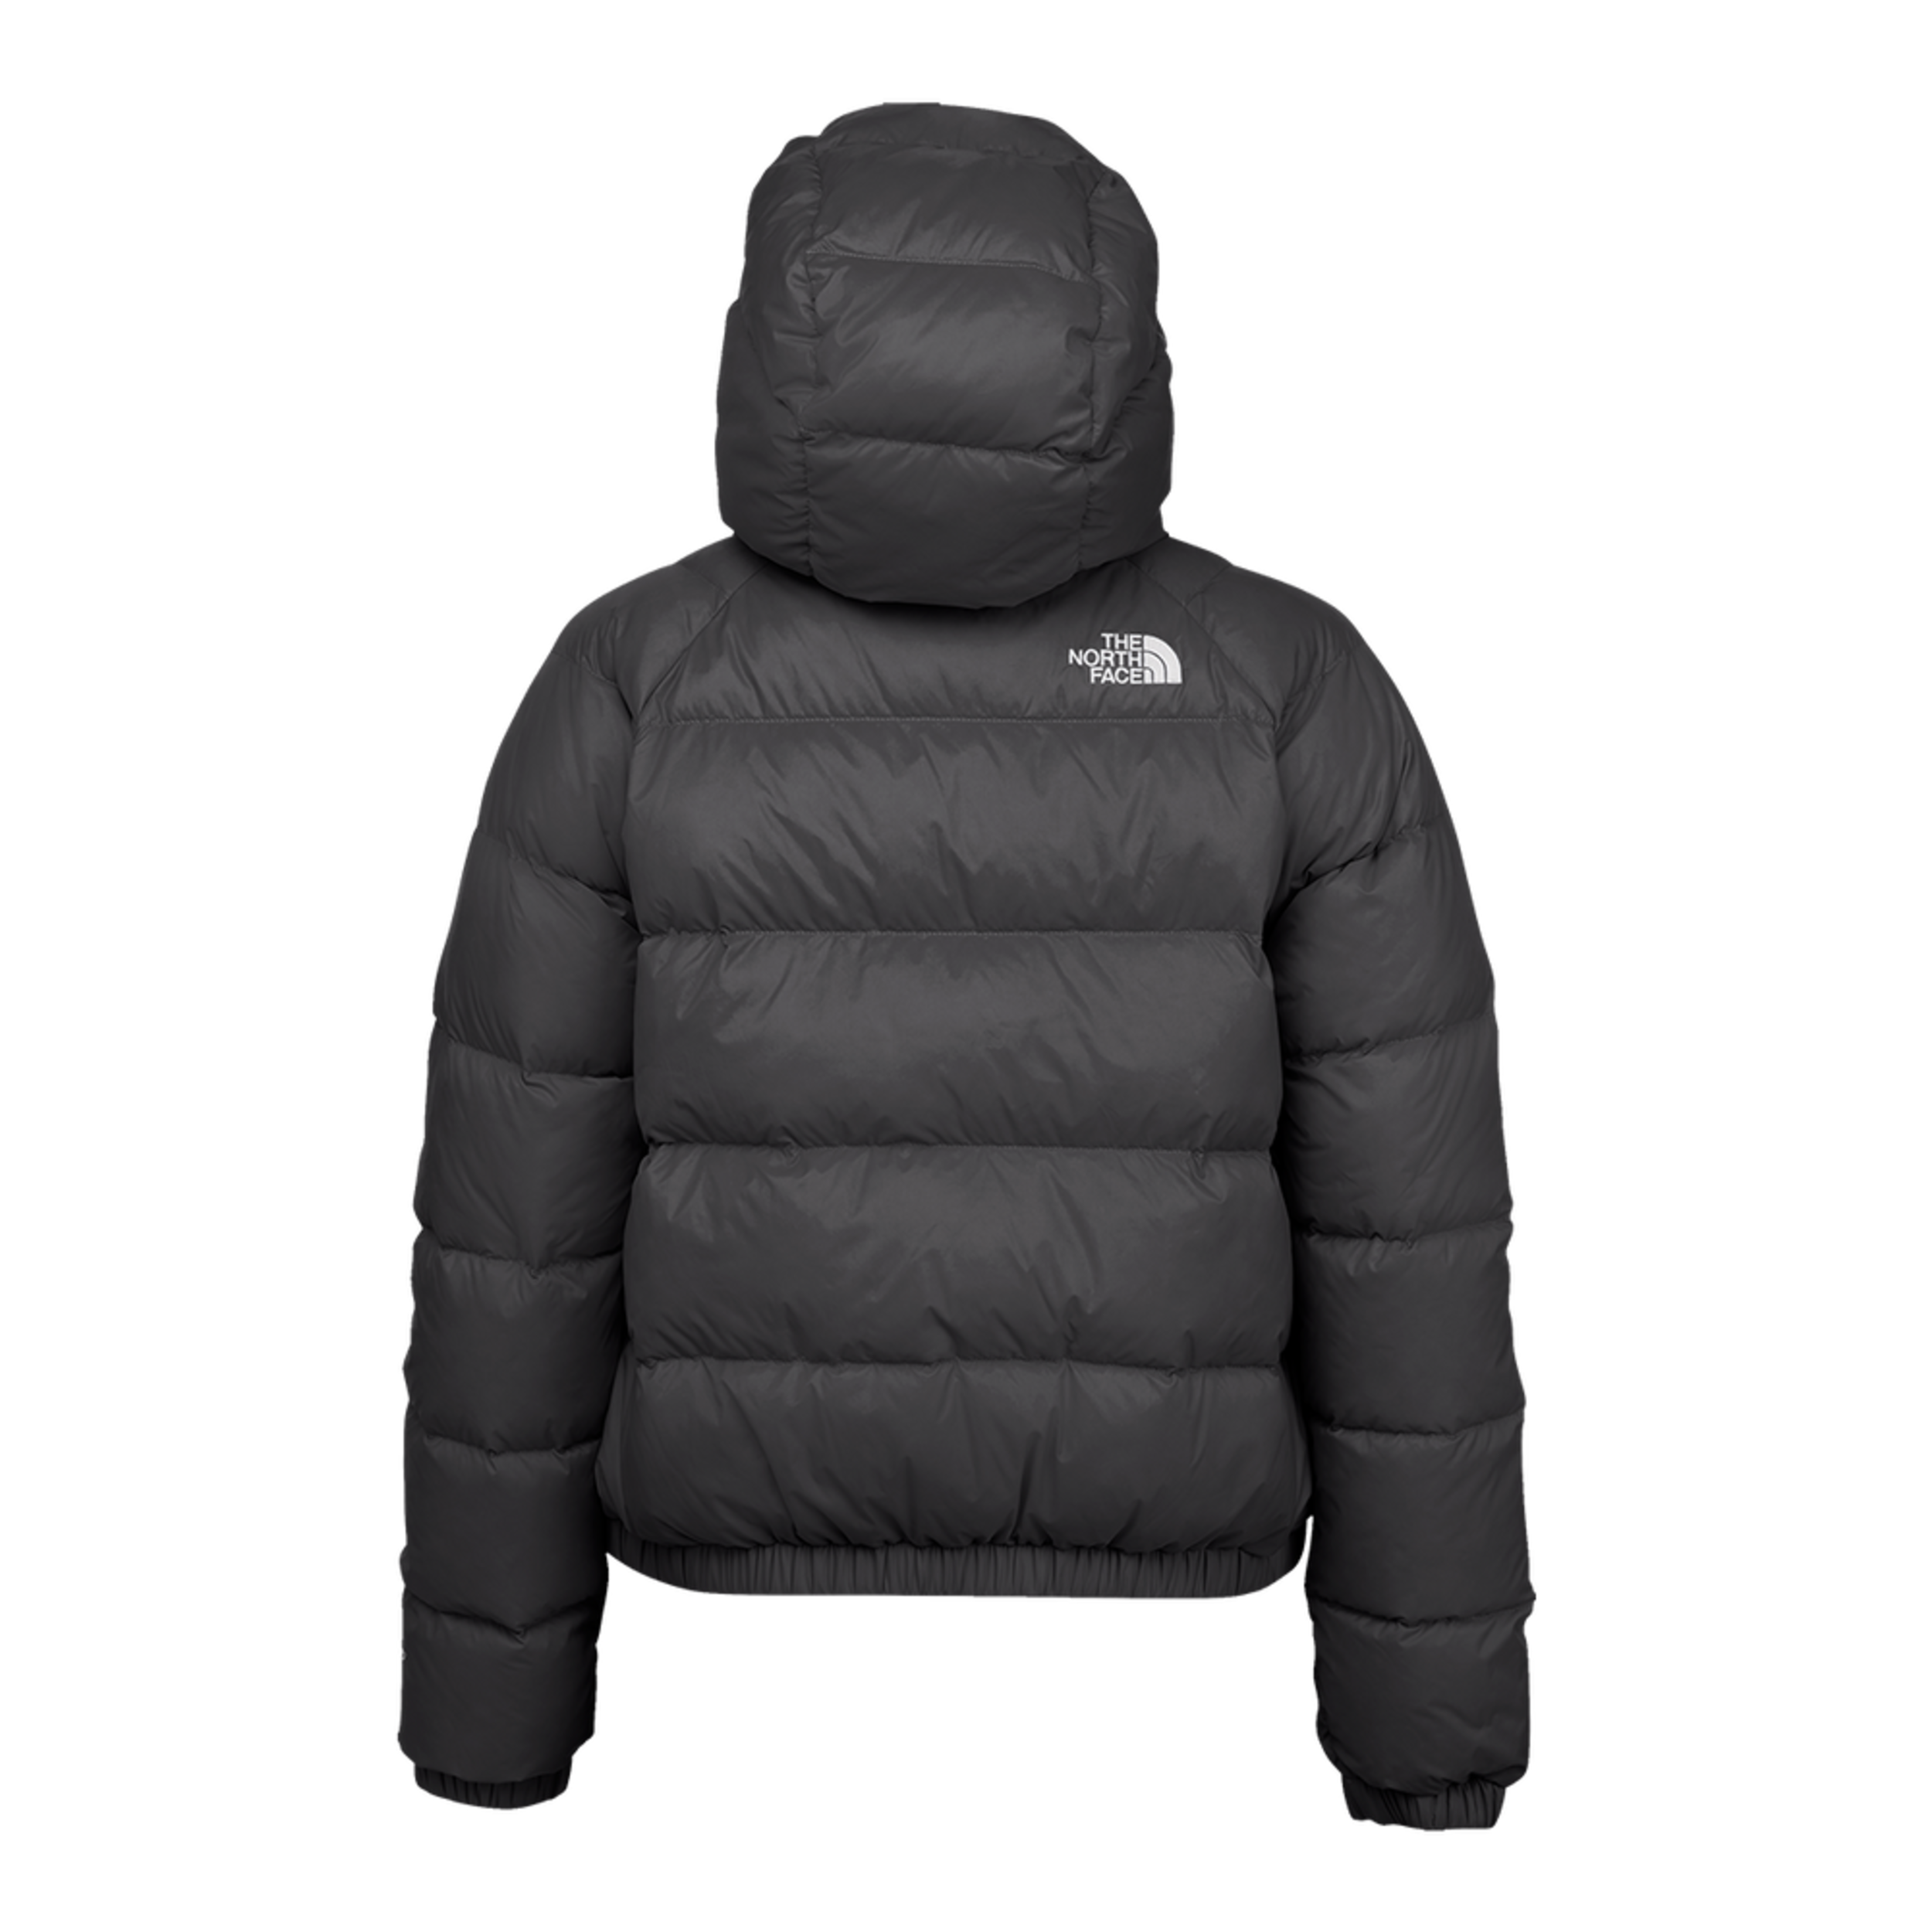 The North Face Women's Hyalite Down Hooded Jacket | SportChek